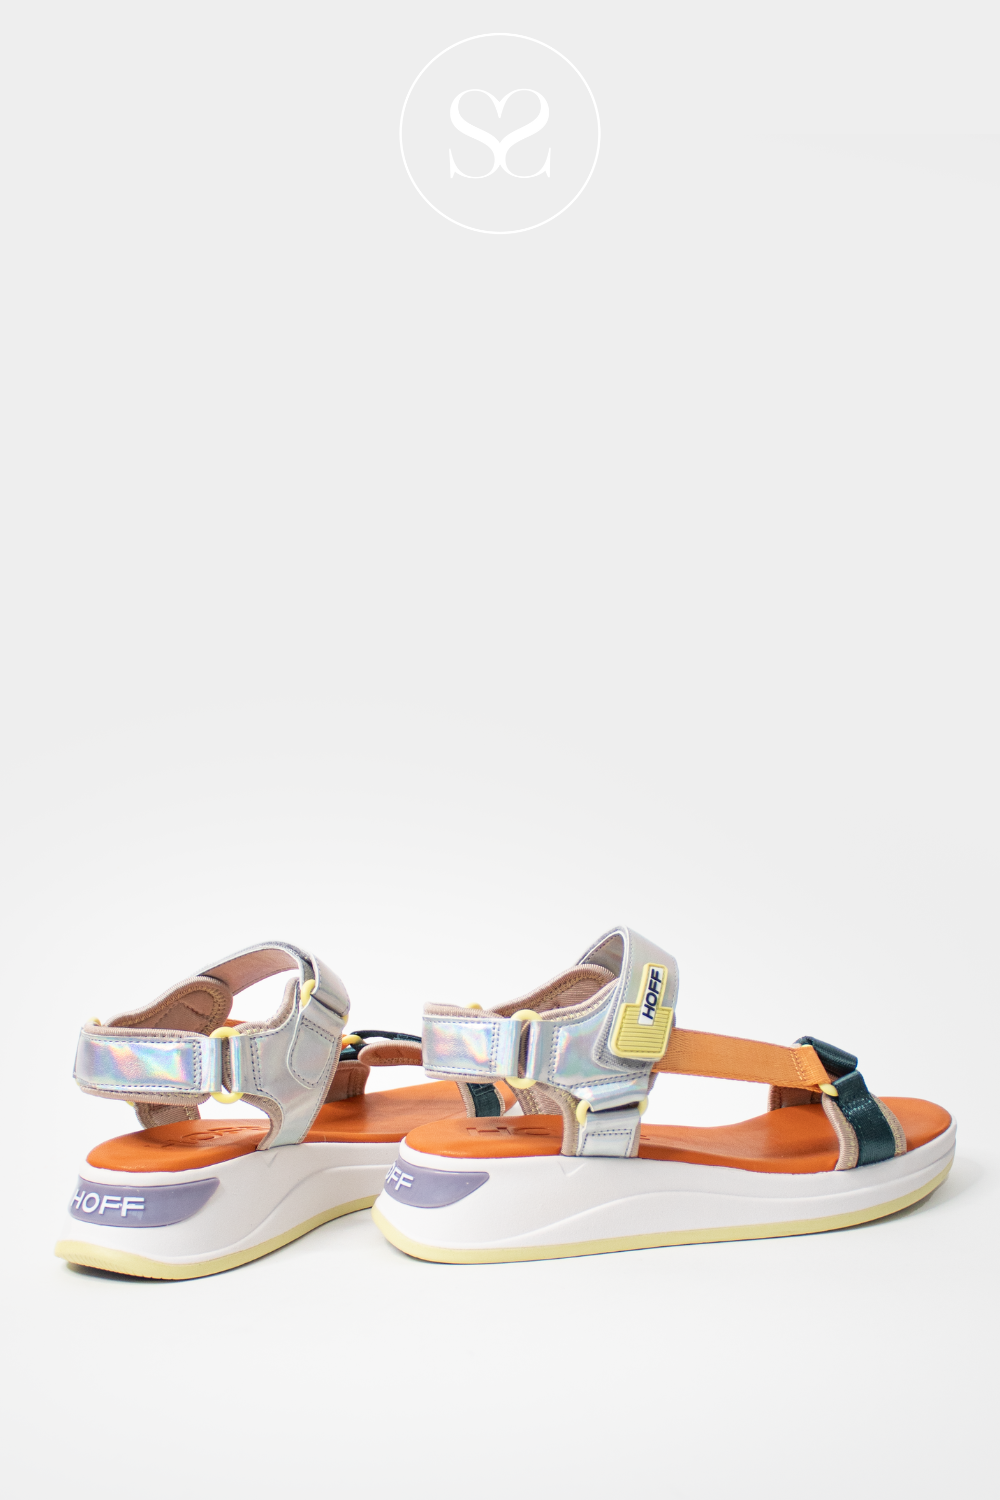 walking sandals for Women from Hoff - silver, teal and orange straps